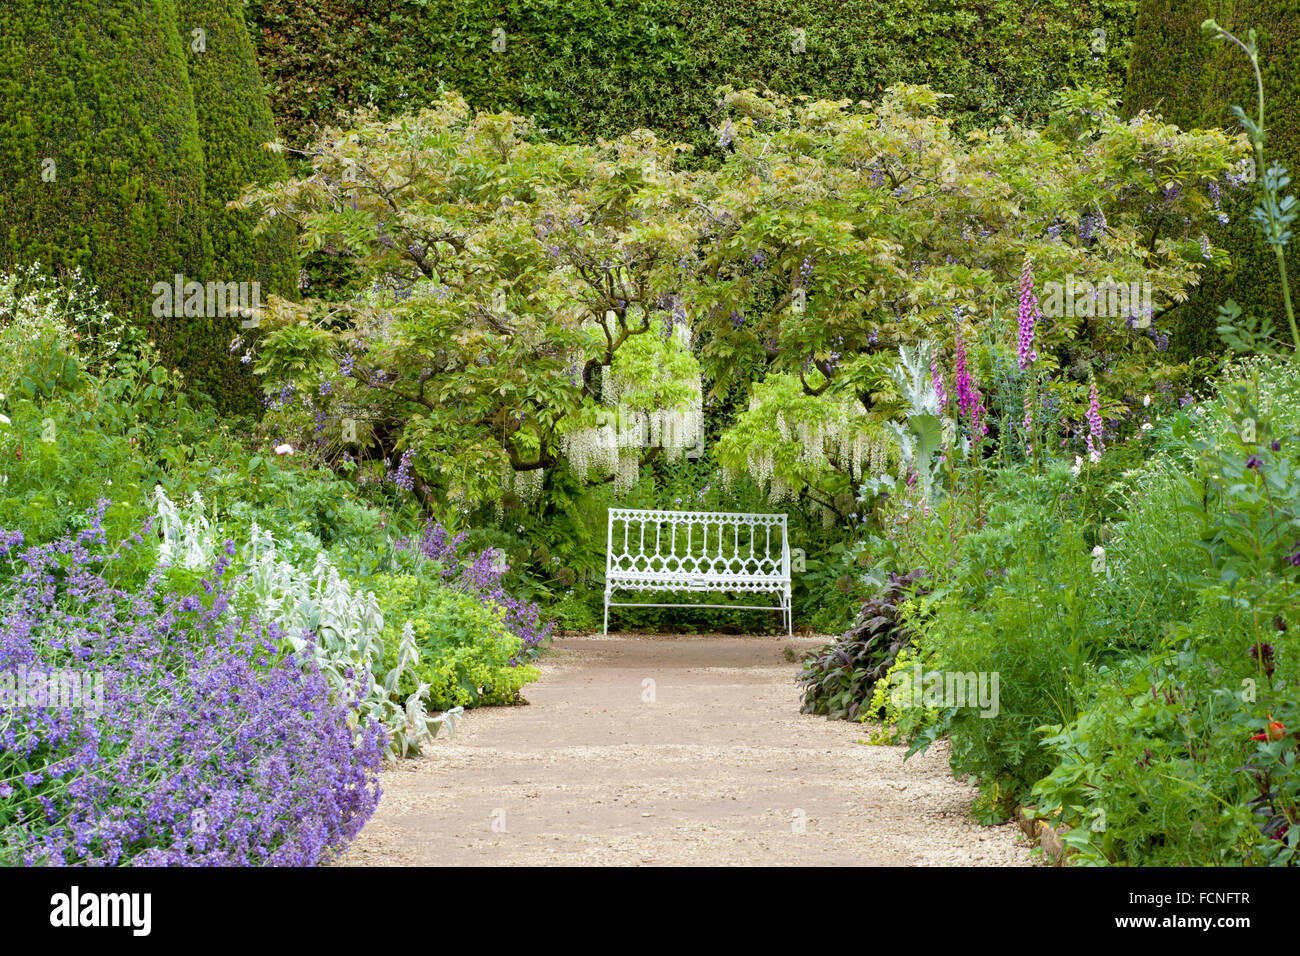 White metal bench under white fragrant wisteria tree at the end of stone pathway in summer garden with cottage flowers in bloom Stock Photo